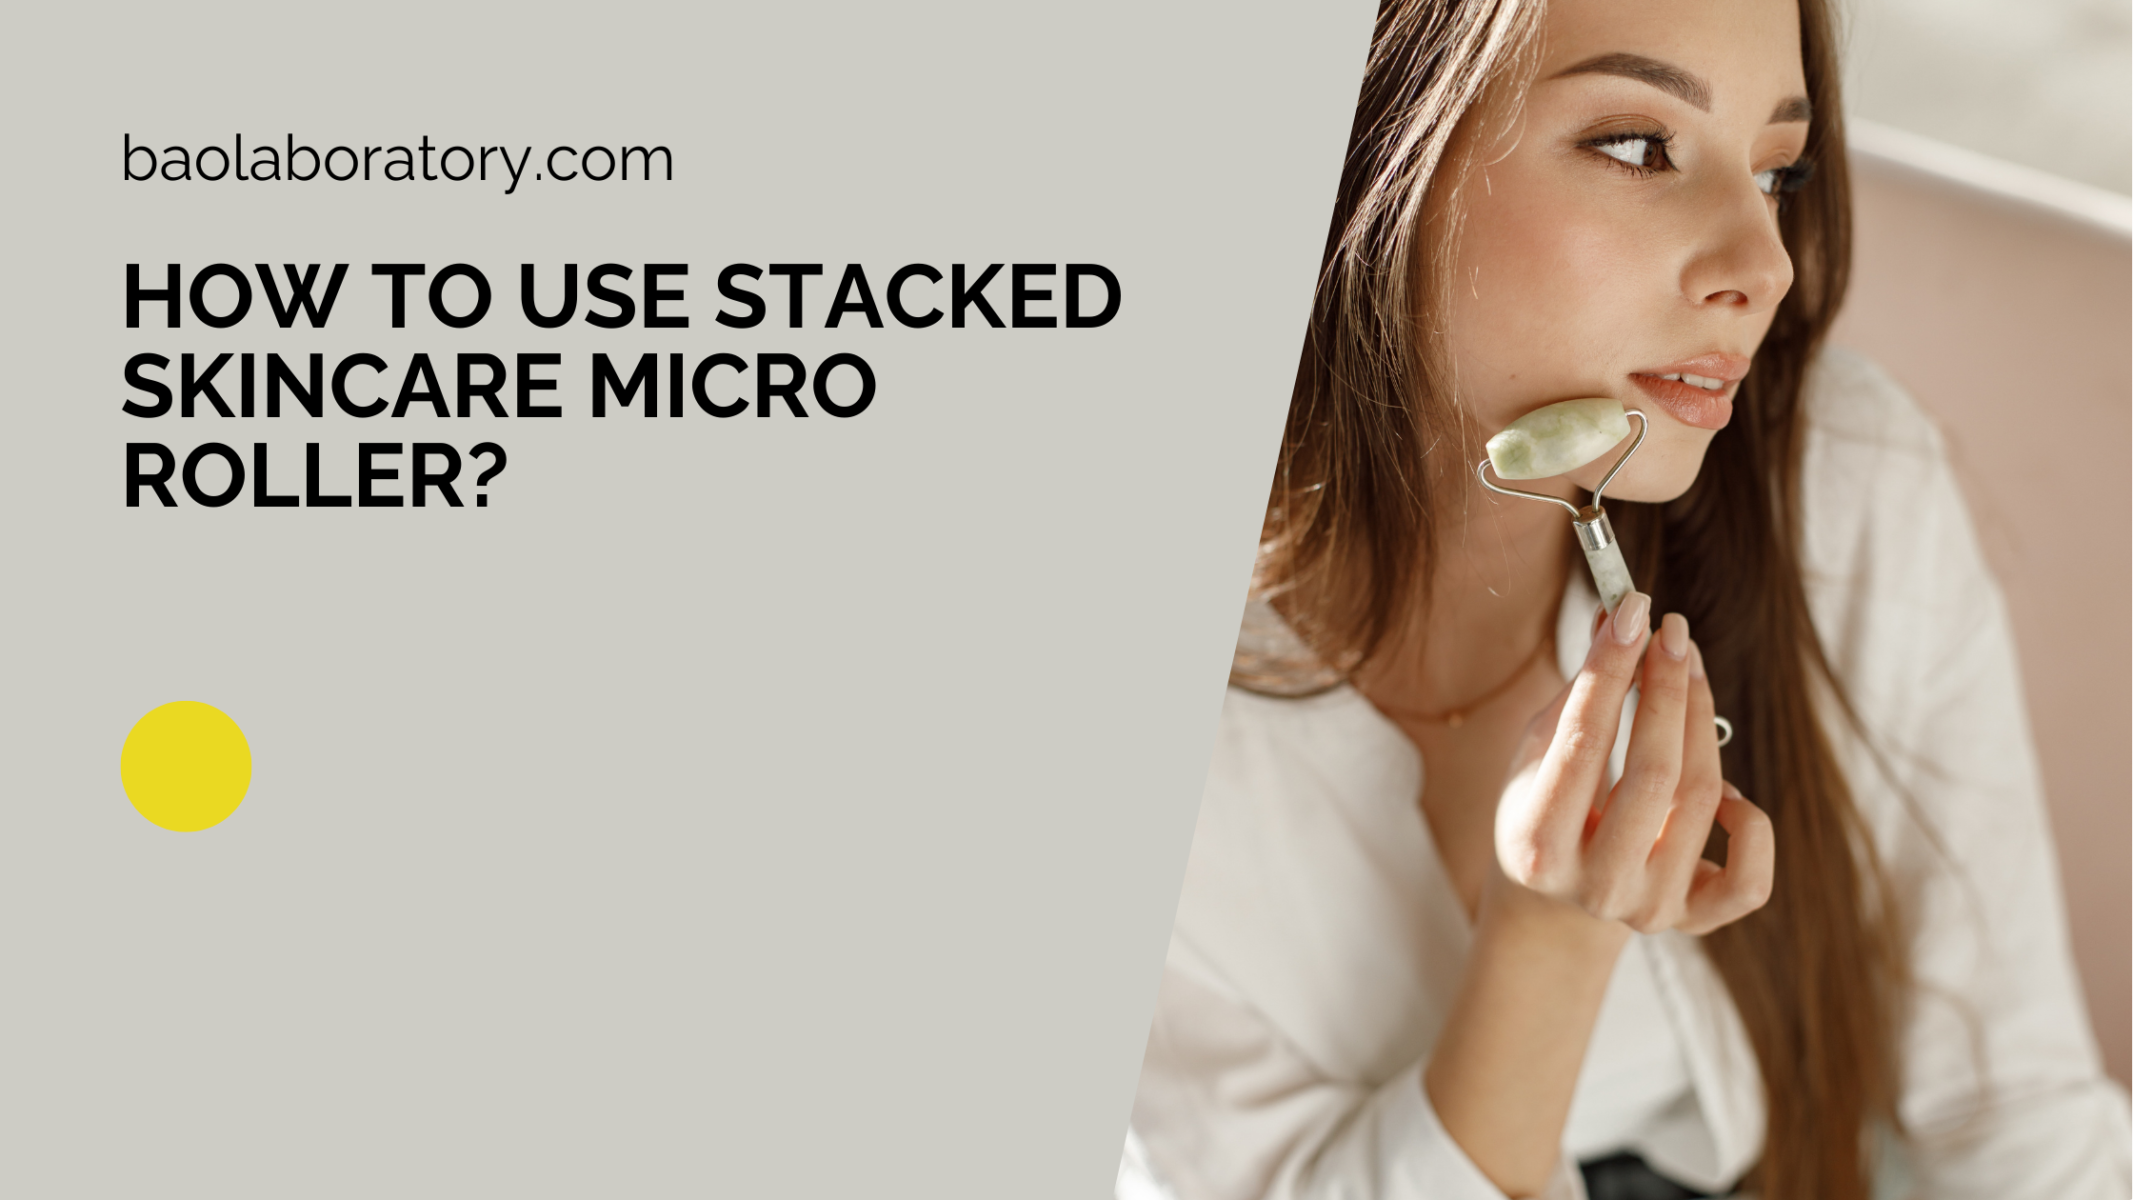 How to Use Stacked Skincare Micro Roller